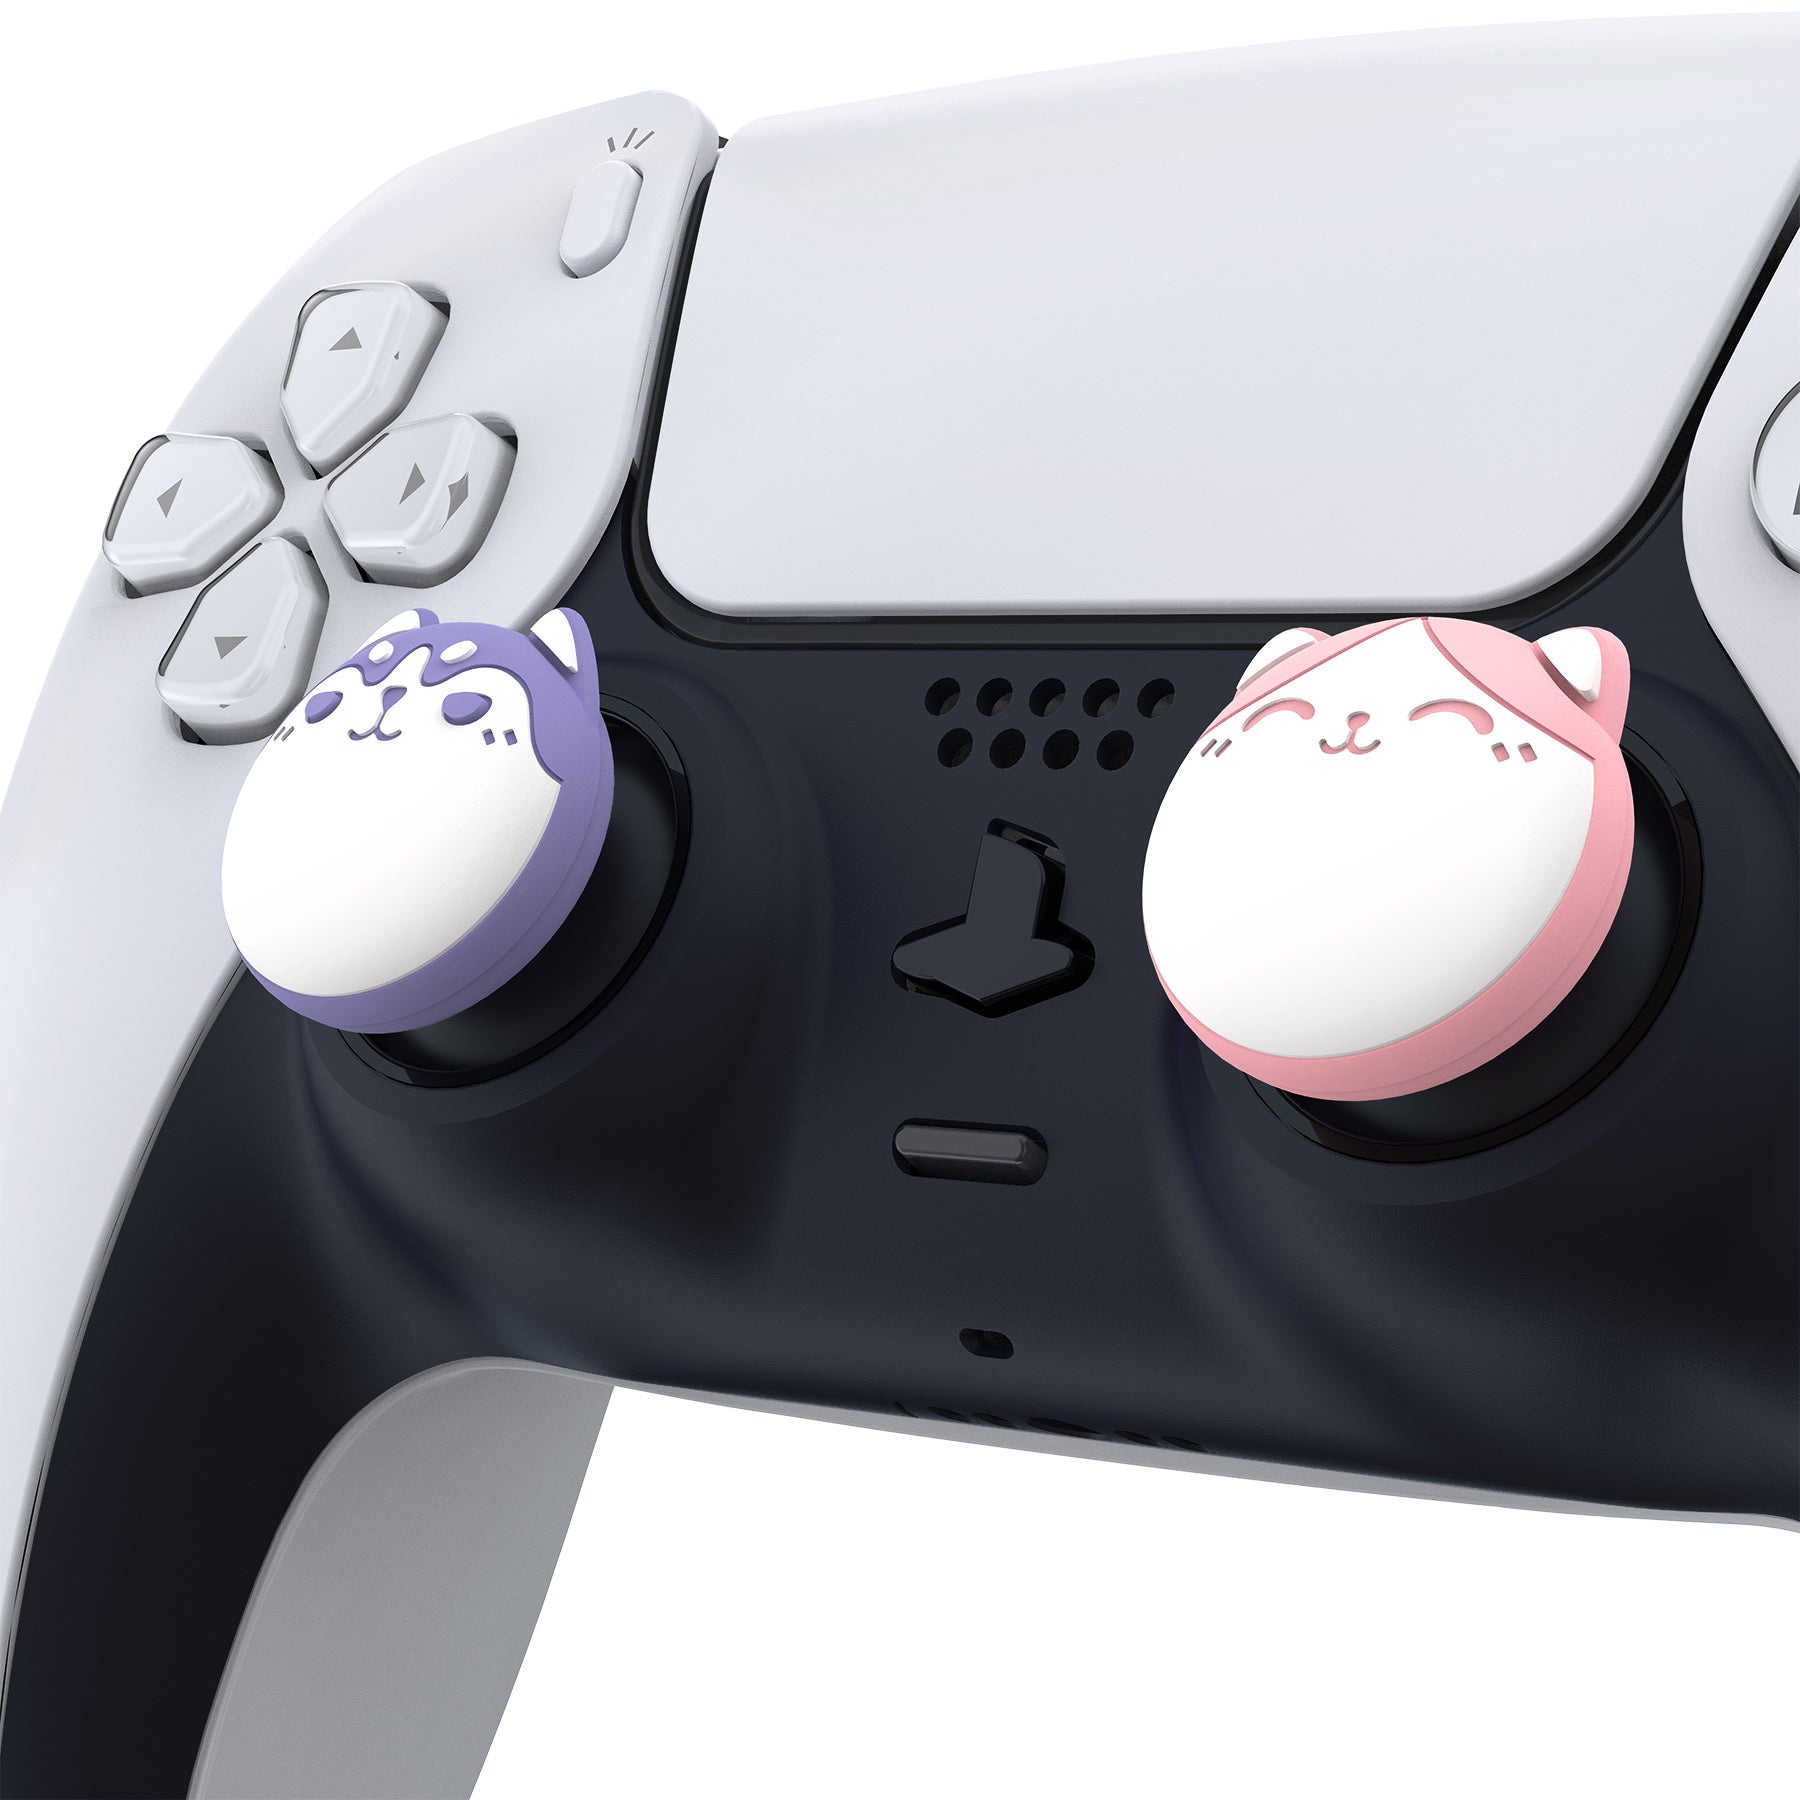 PlayVital Husky & Kitty Cute Thumb Grip Caps for PS5/4 Controller, Silicone Analog Stick Caps Cover for Xbox Series X/S, Thumbstick Caps for Switch Pro Controller - Pale Red & Light Violet - PJM2039 PlayVital